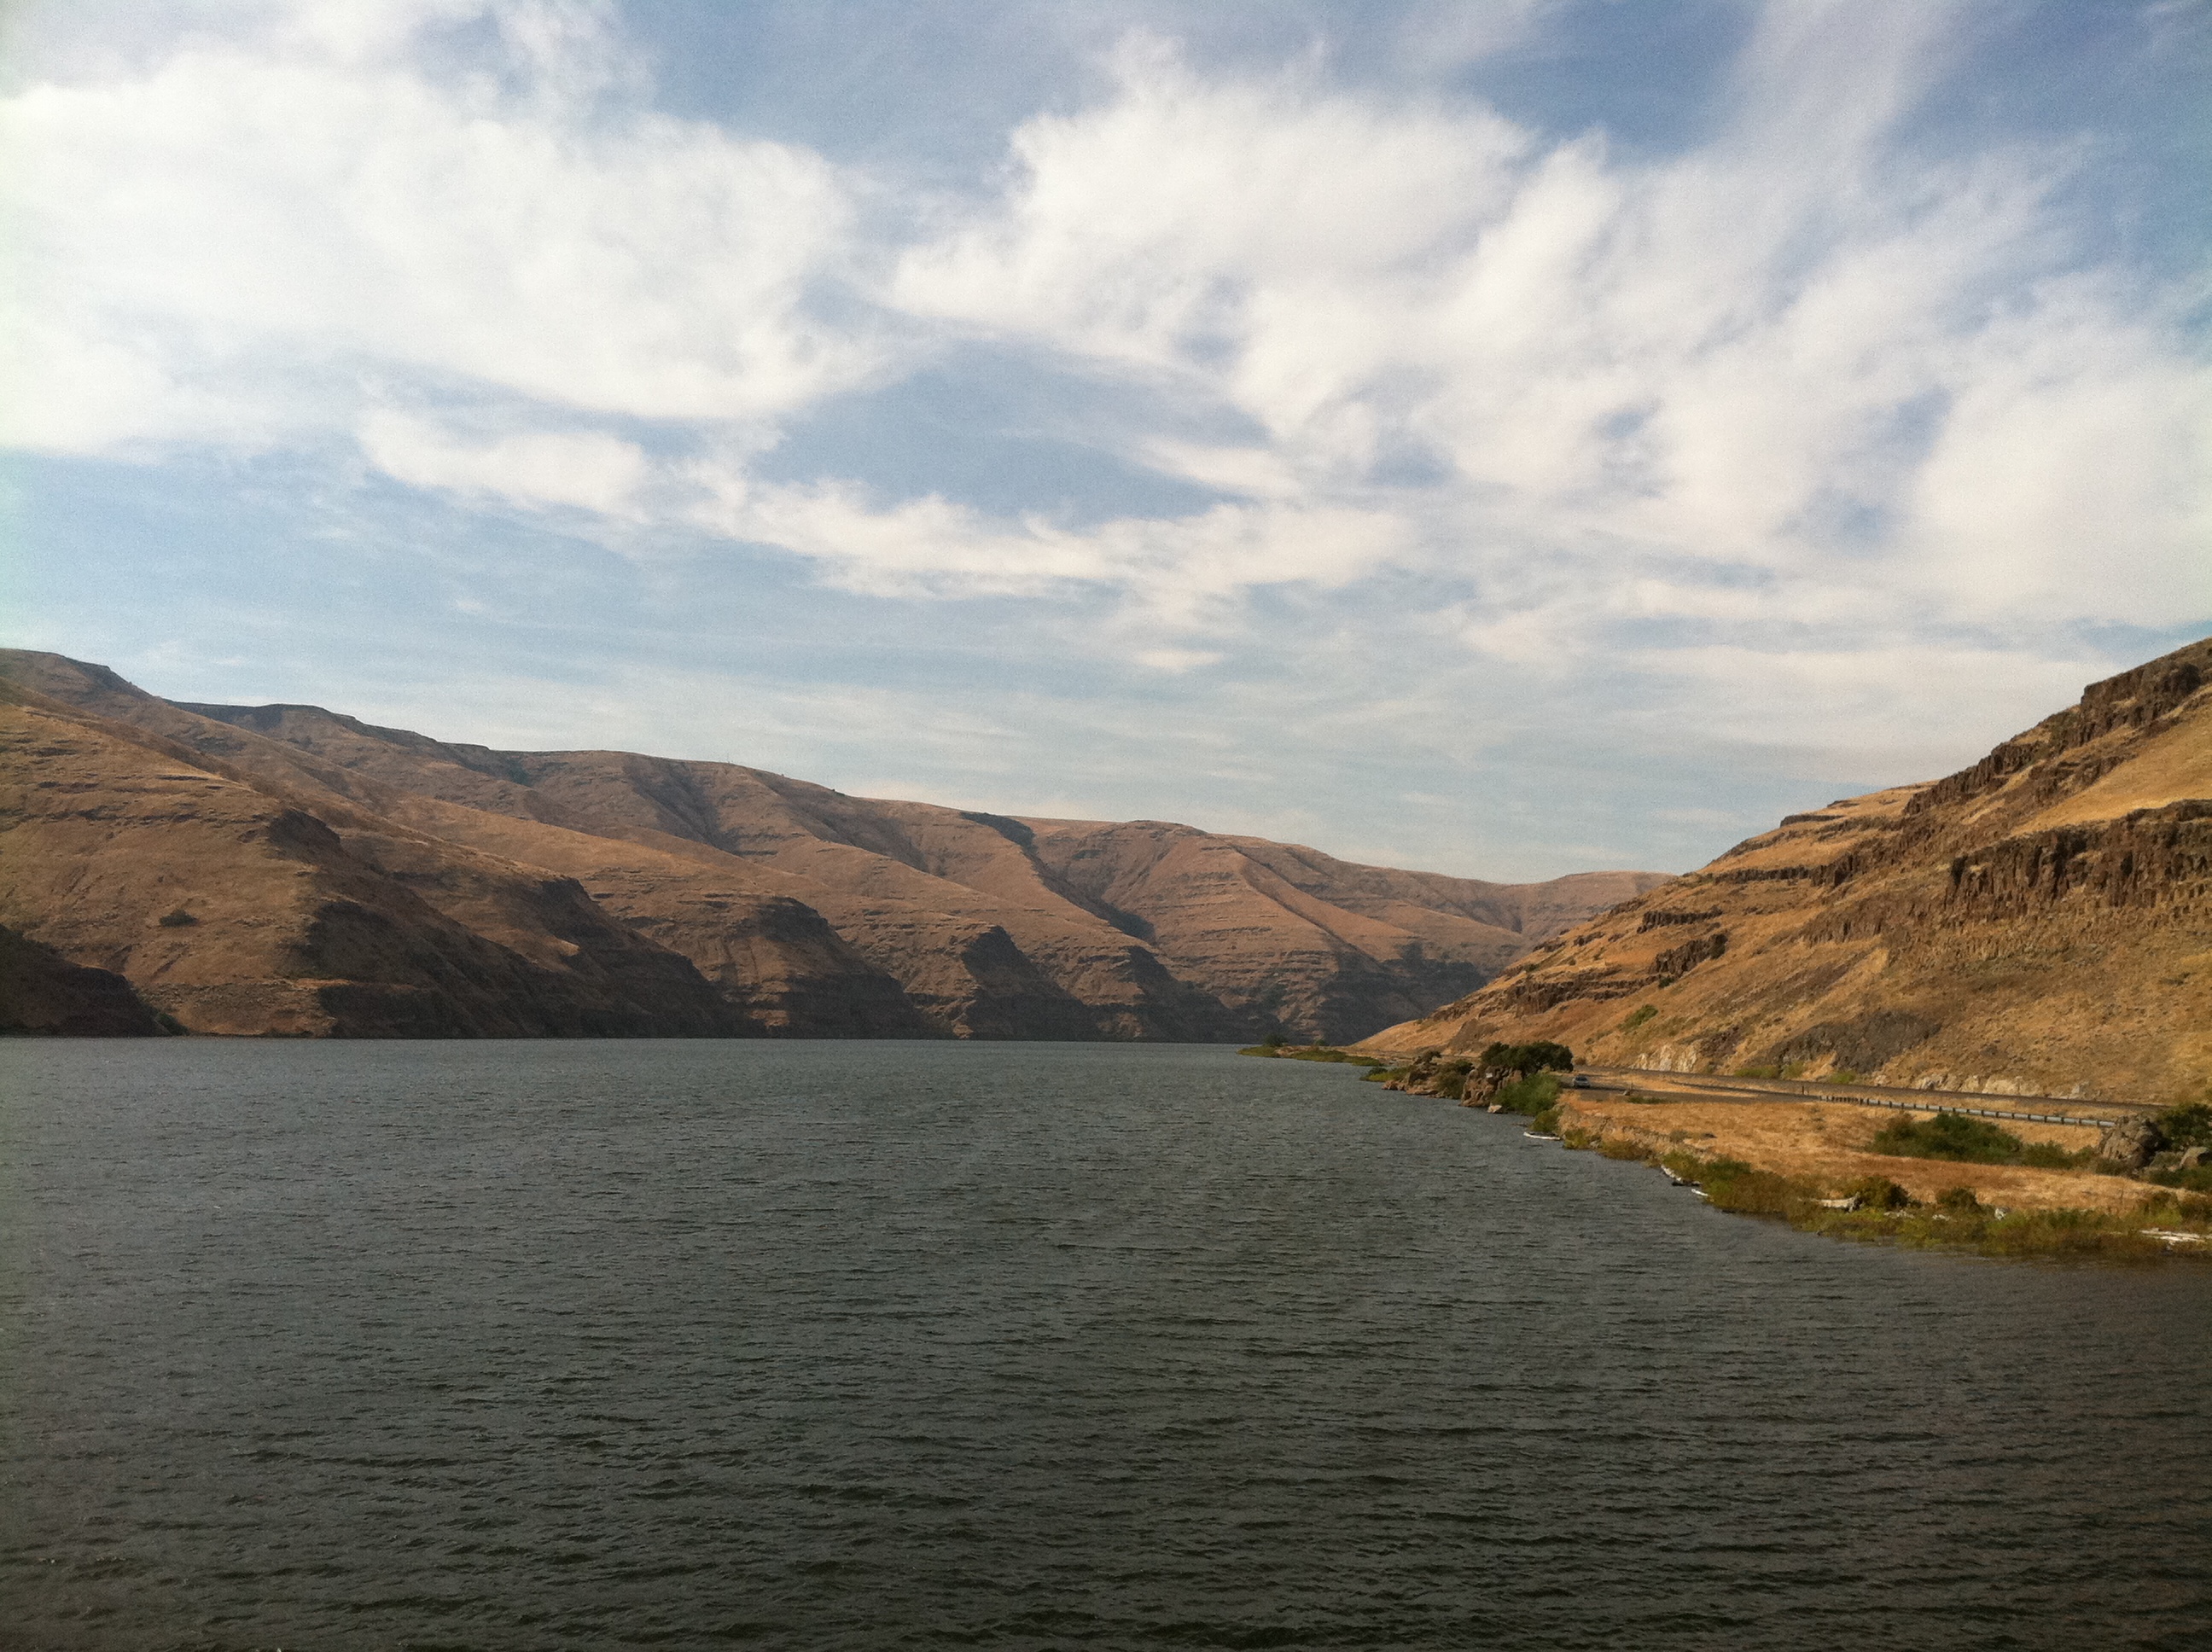 Down with the dams: Free the Snake River and Nimiipuu Canoe Project